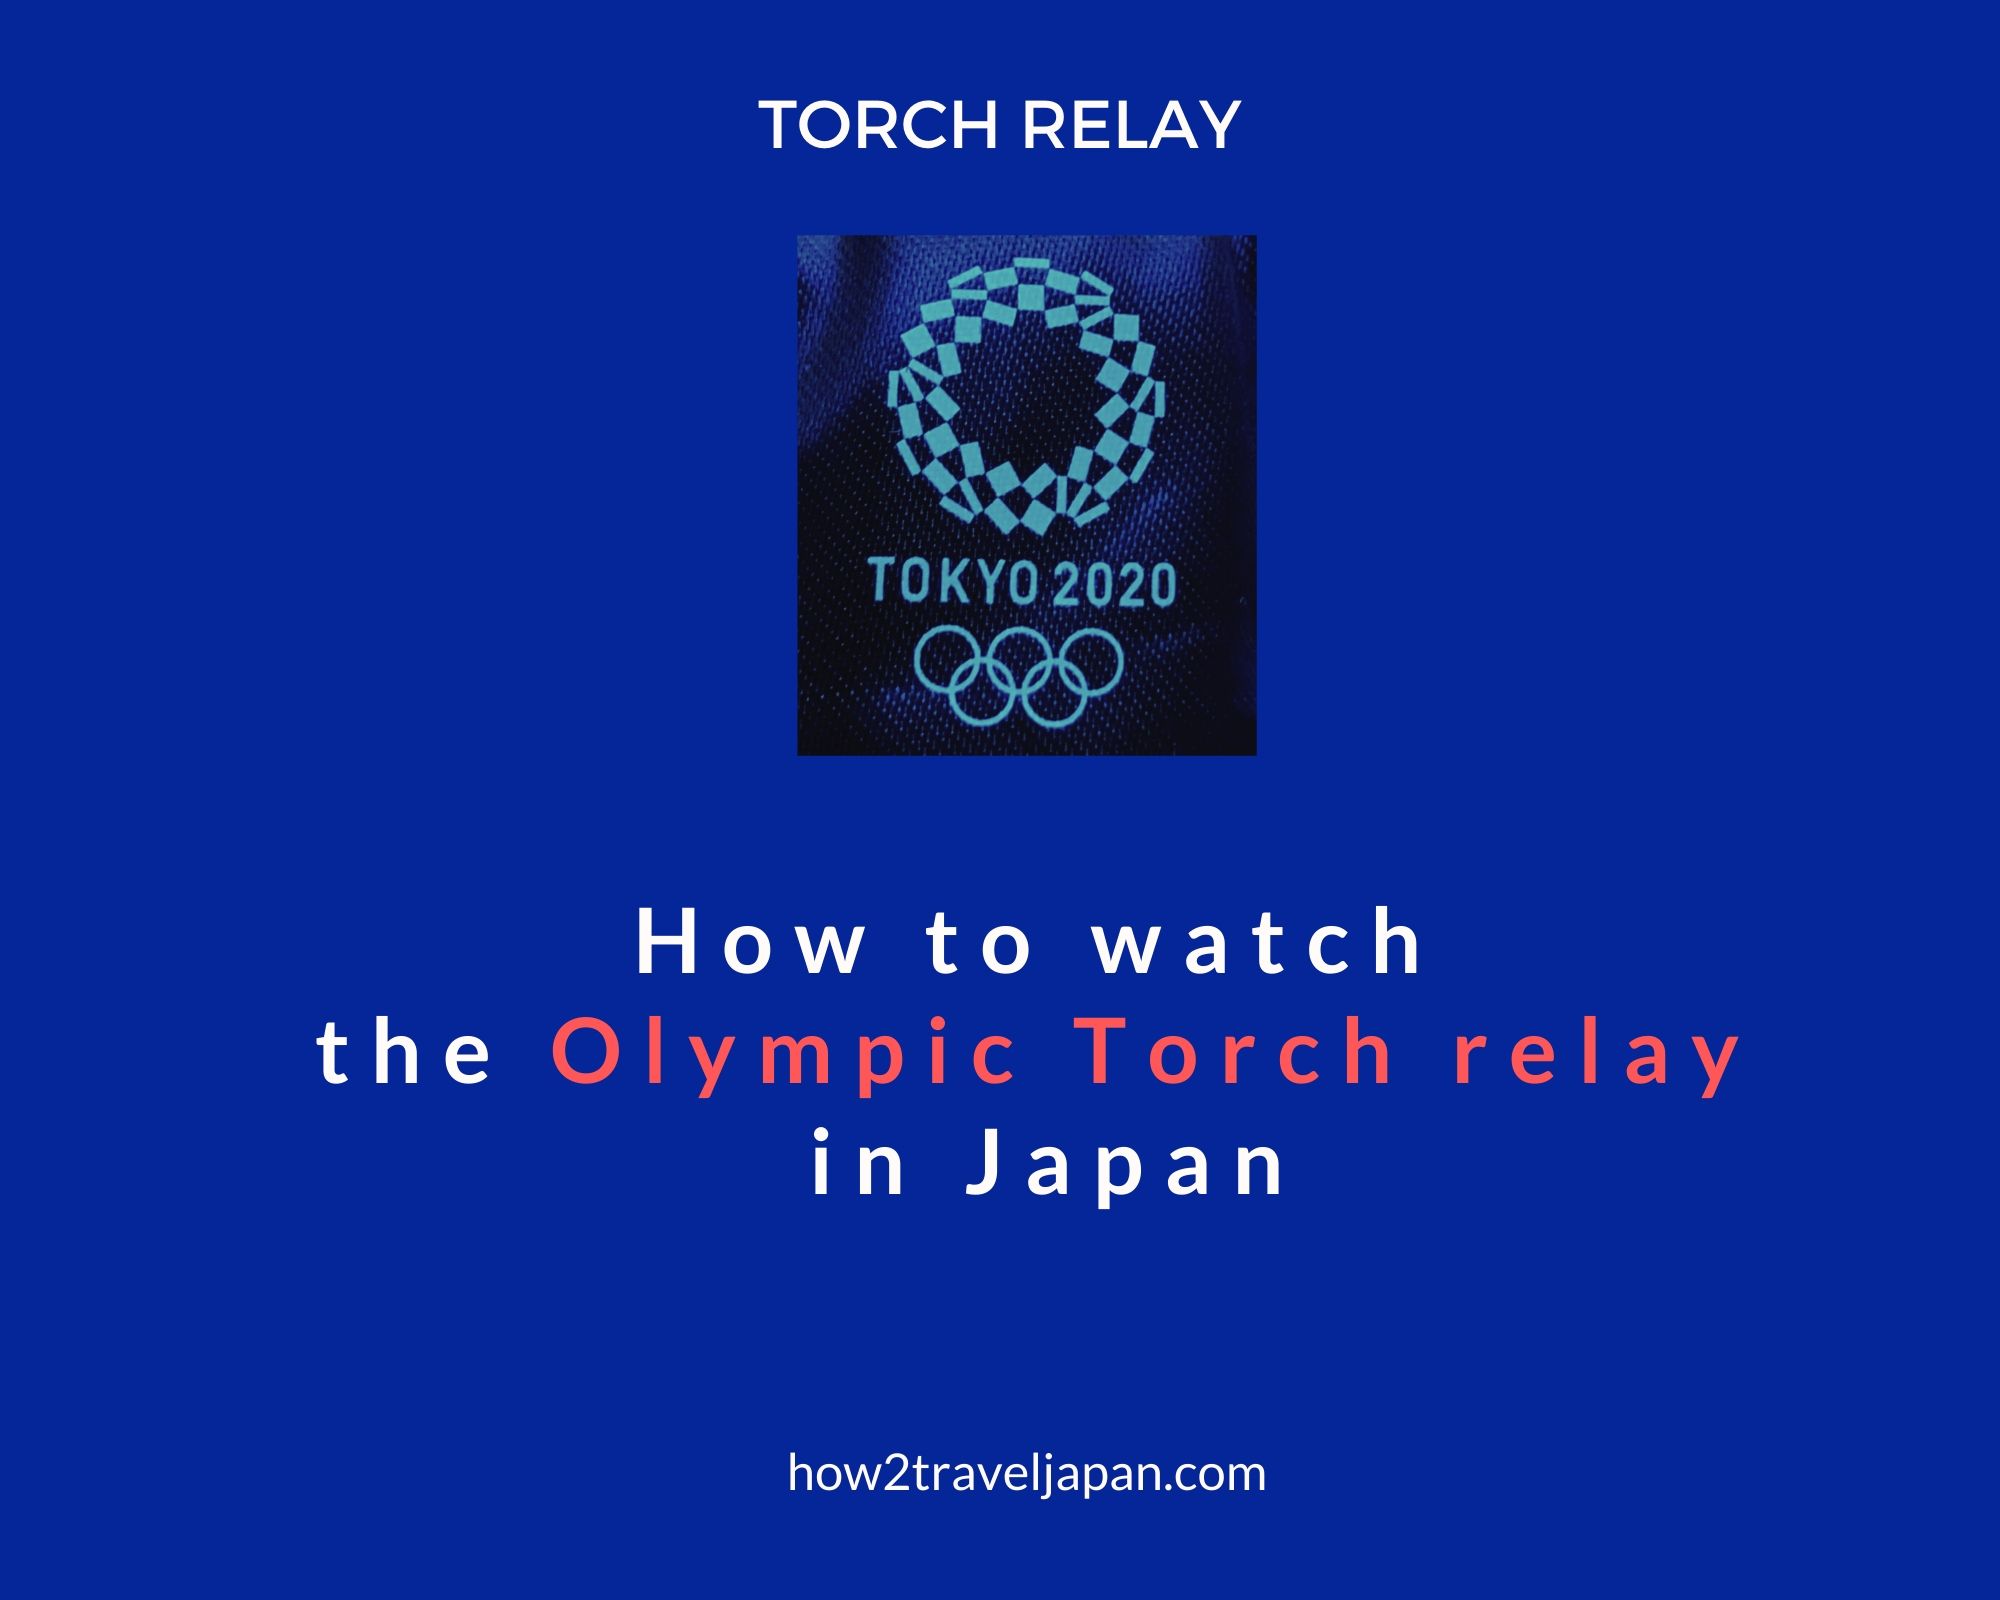 You are currently viewing how to watch the Olympic Torch relay